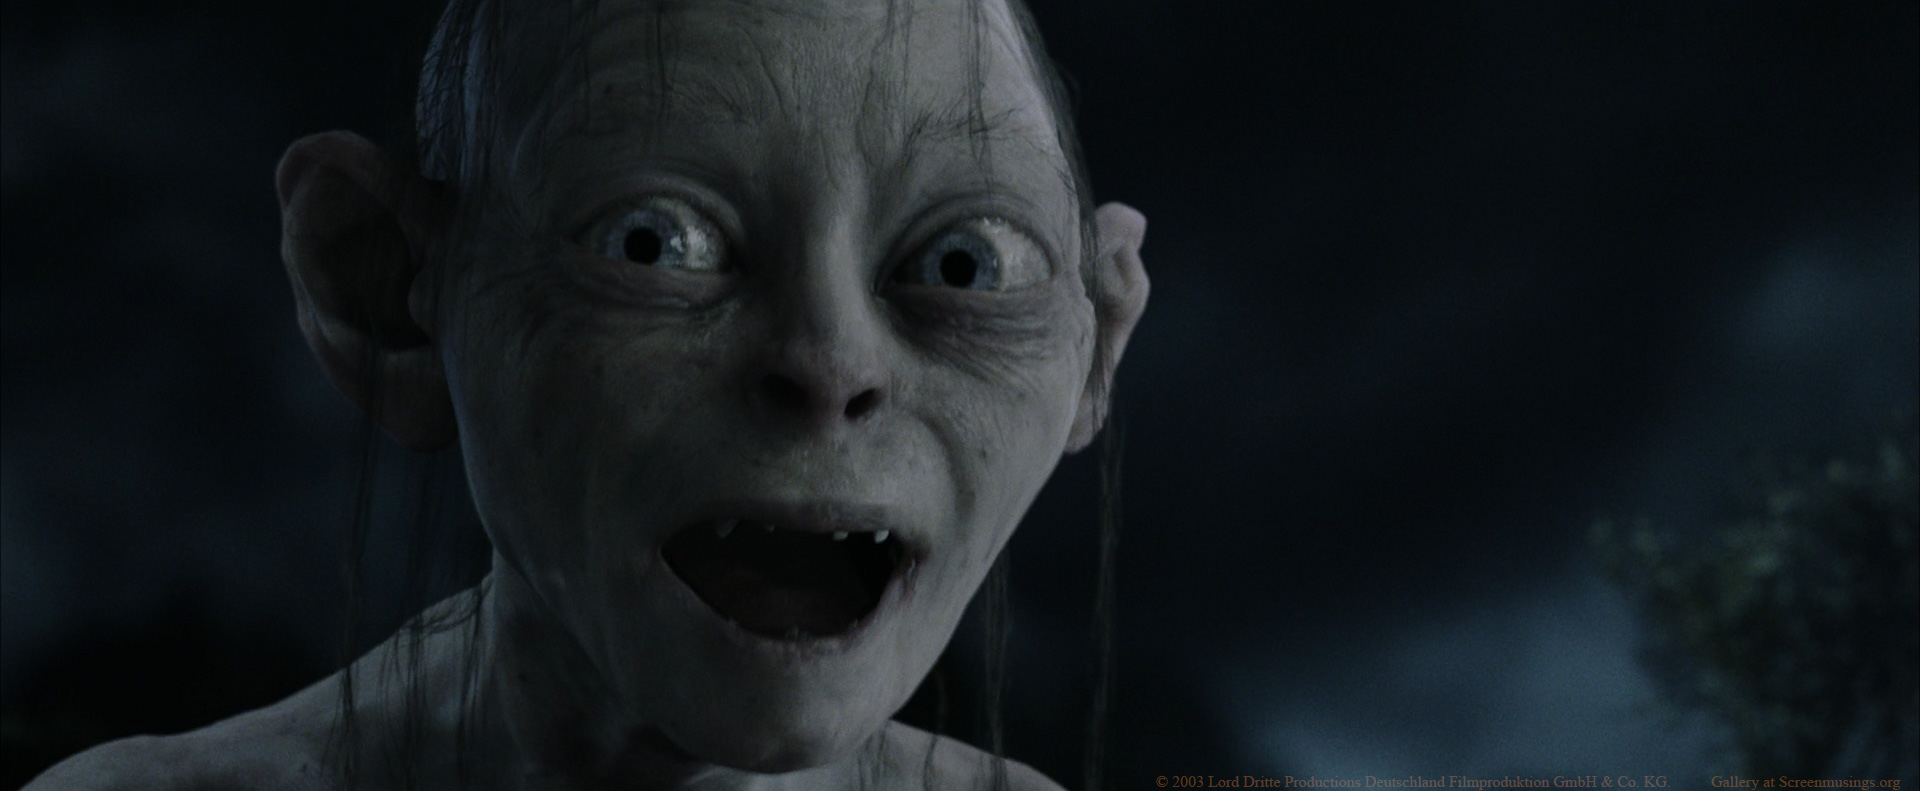 Andy Serkis in The Lord of the Rings: The Return of the King